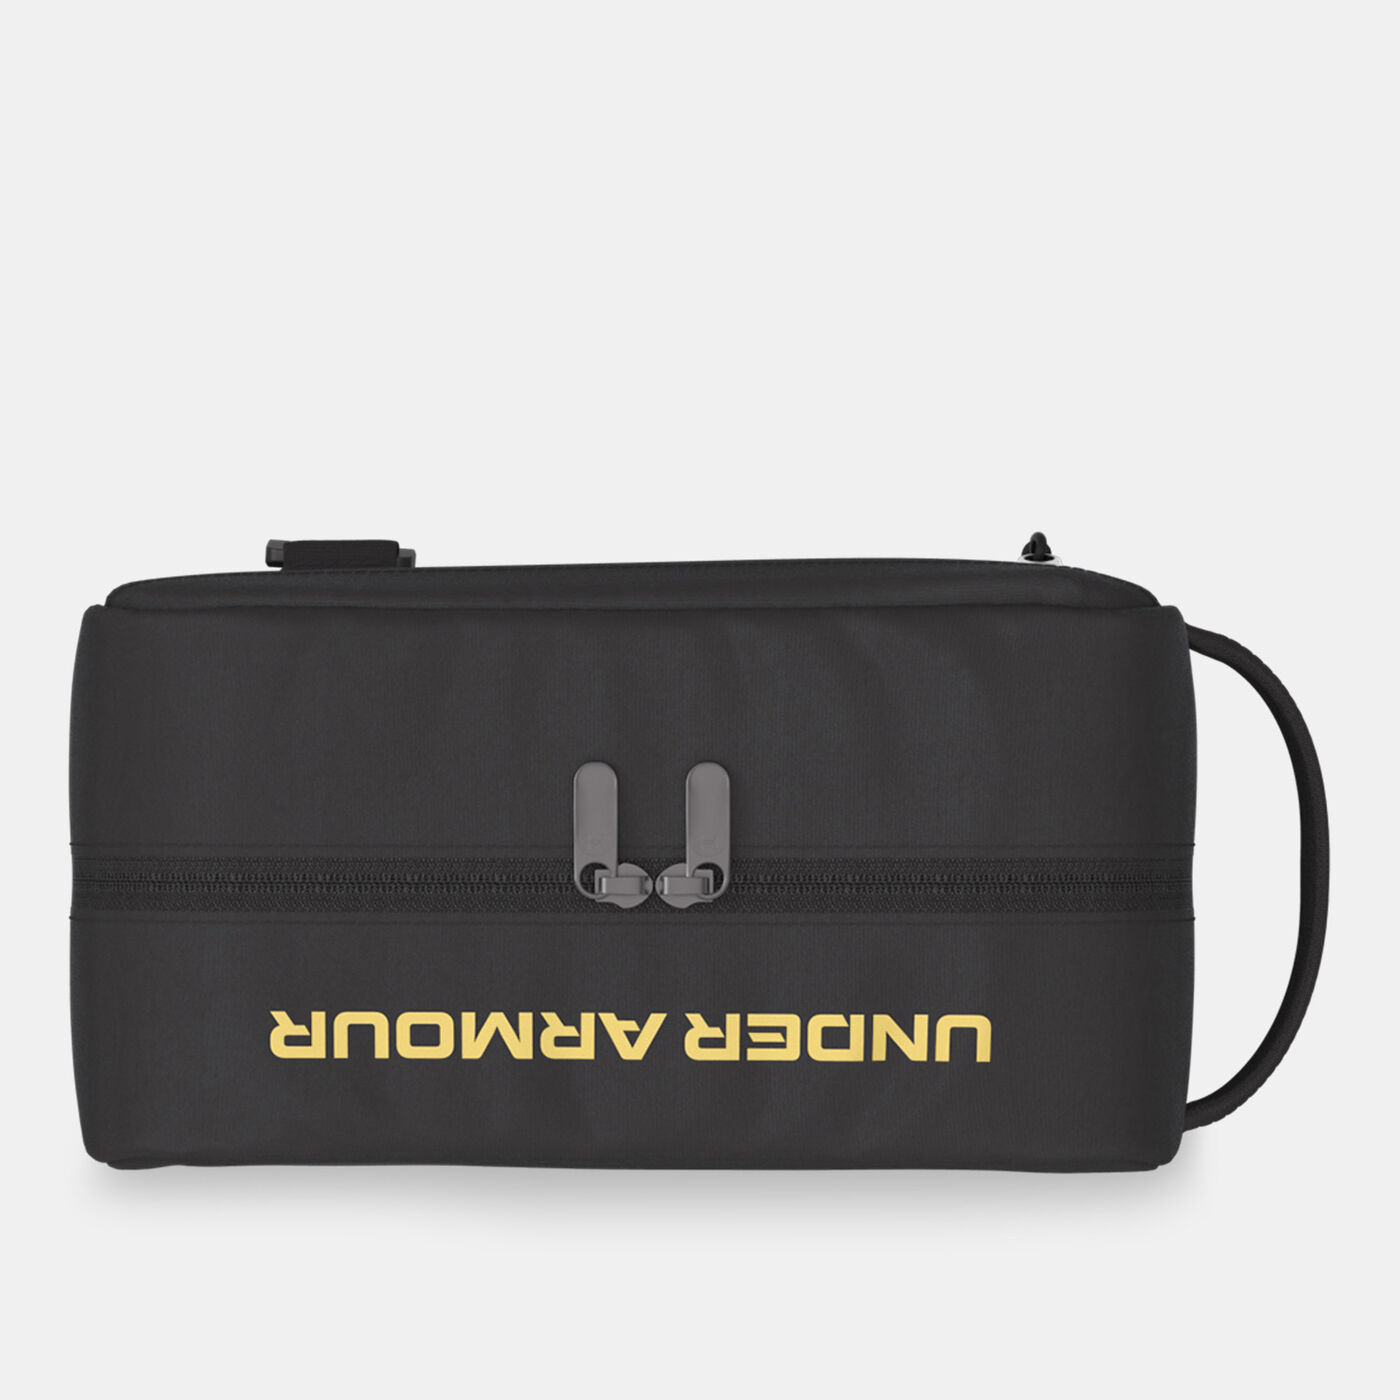 Contain Travel Pouch